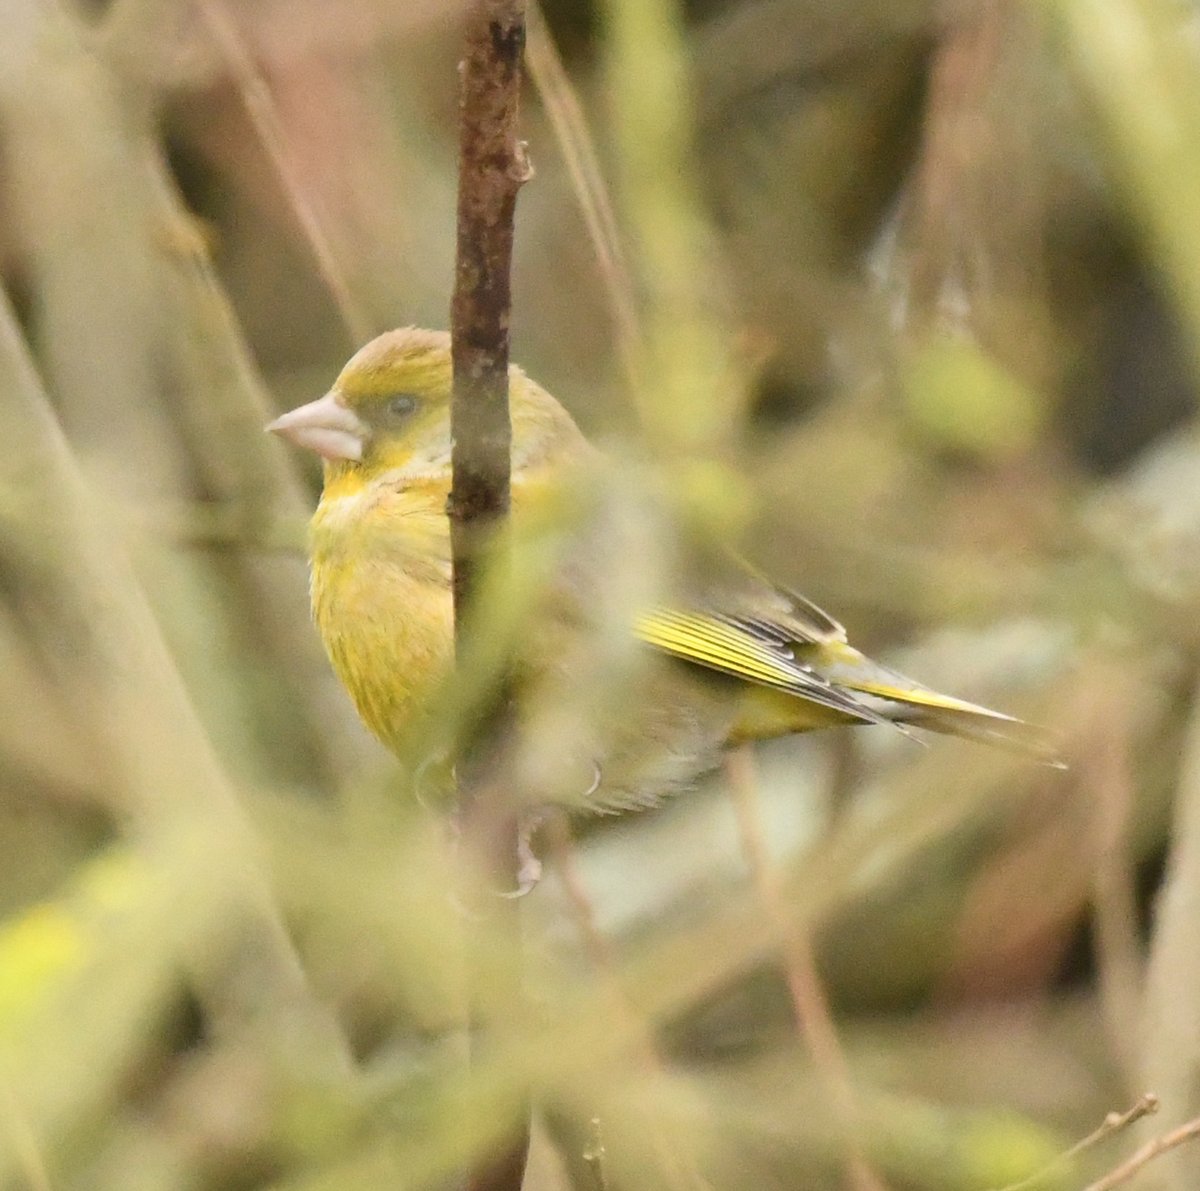 Naff picture of what is becoming an increasingly scarce bird - Greenfinch (@RSPBDungeness today). 69% decline in the UK 1979-2020 and now its conservation status is 'Red Listed' - endangered! These are difficult times for this once common species. @_BTO @KentishPlover #Greenfinch